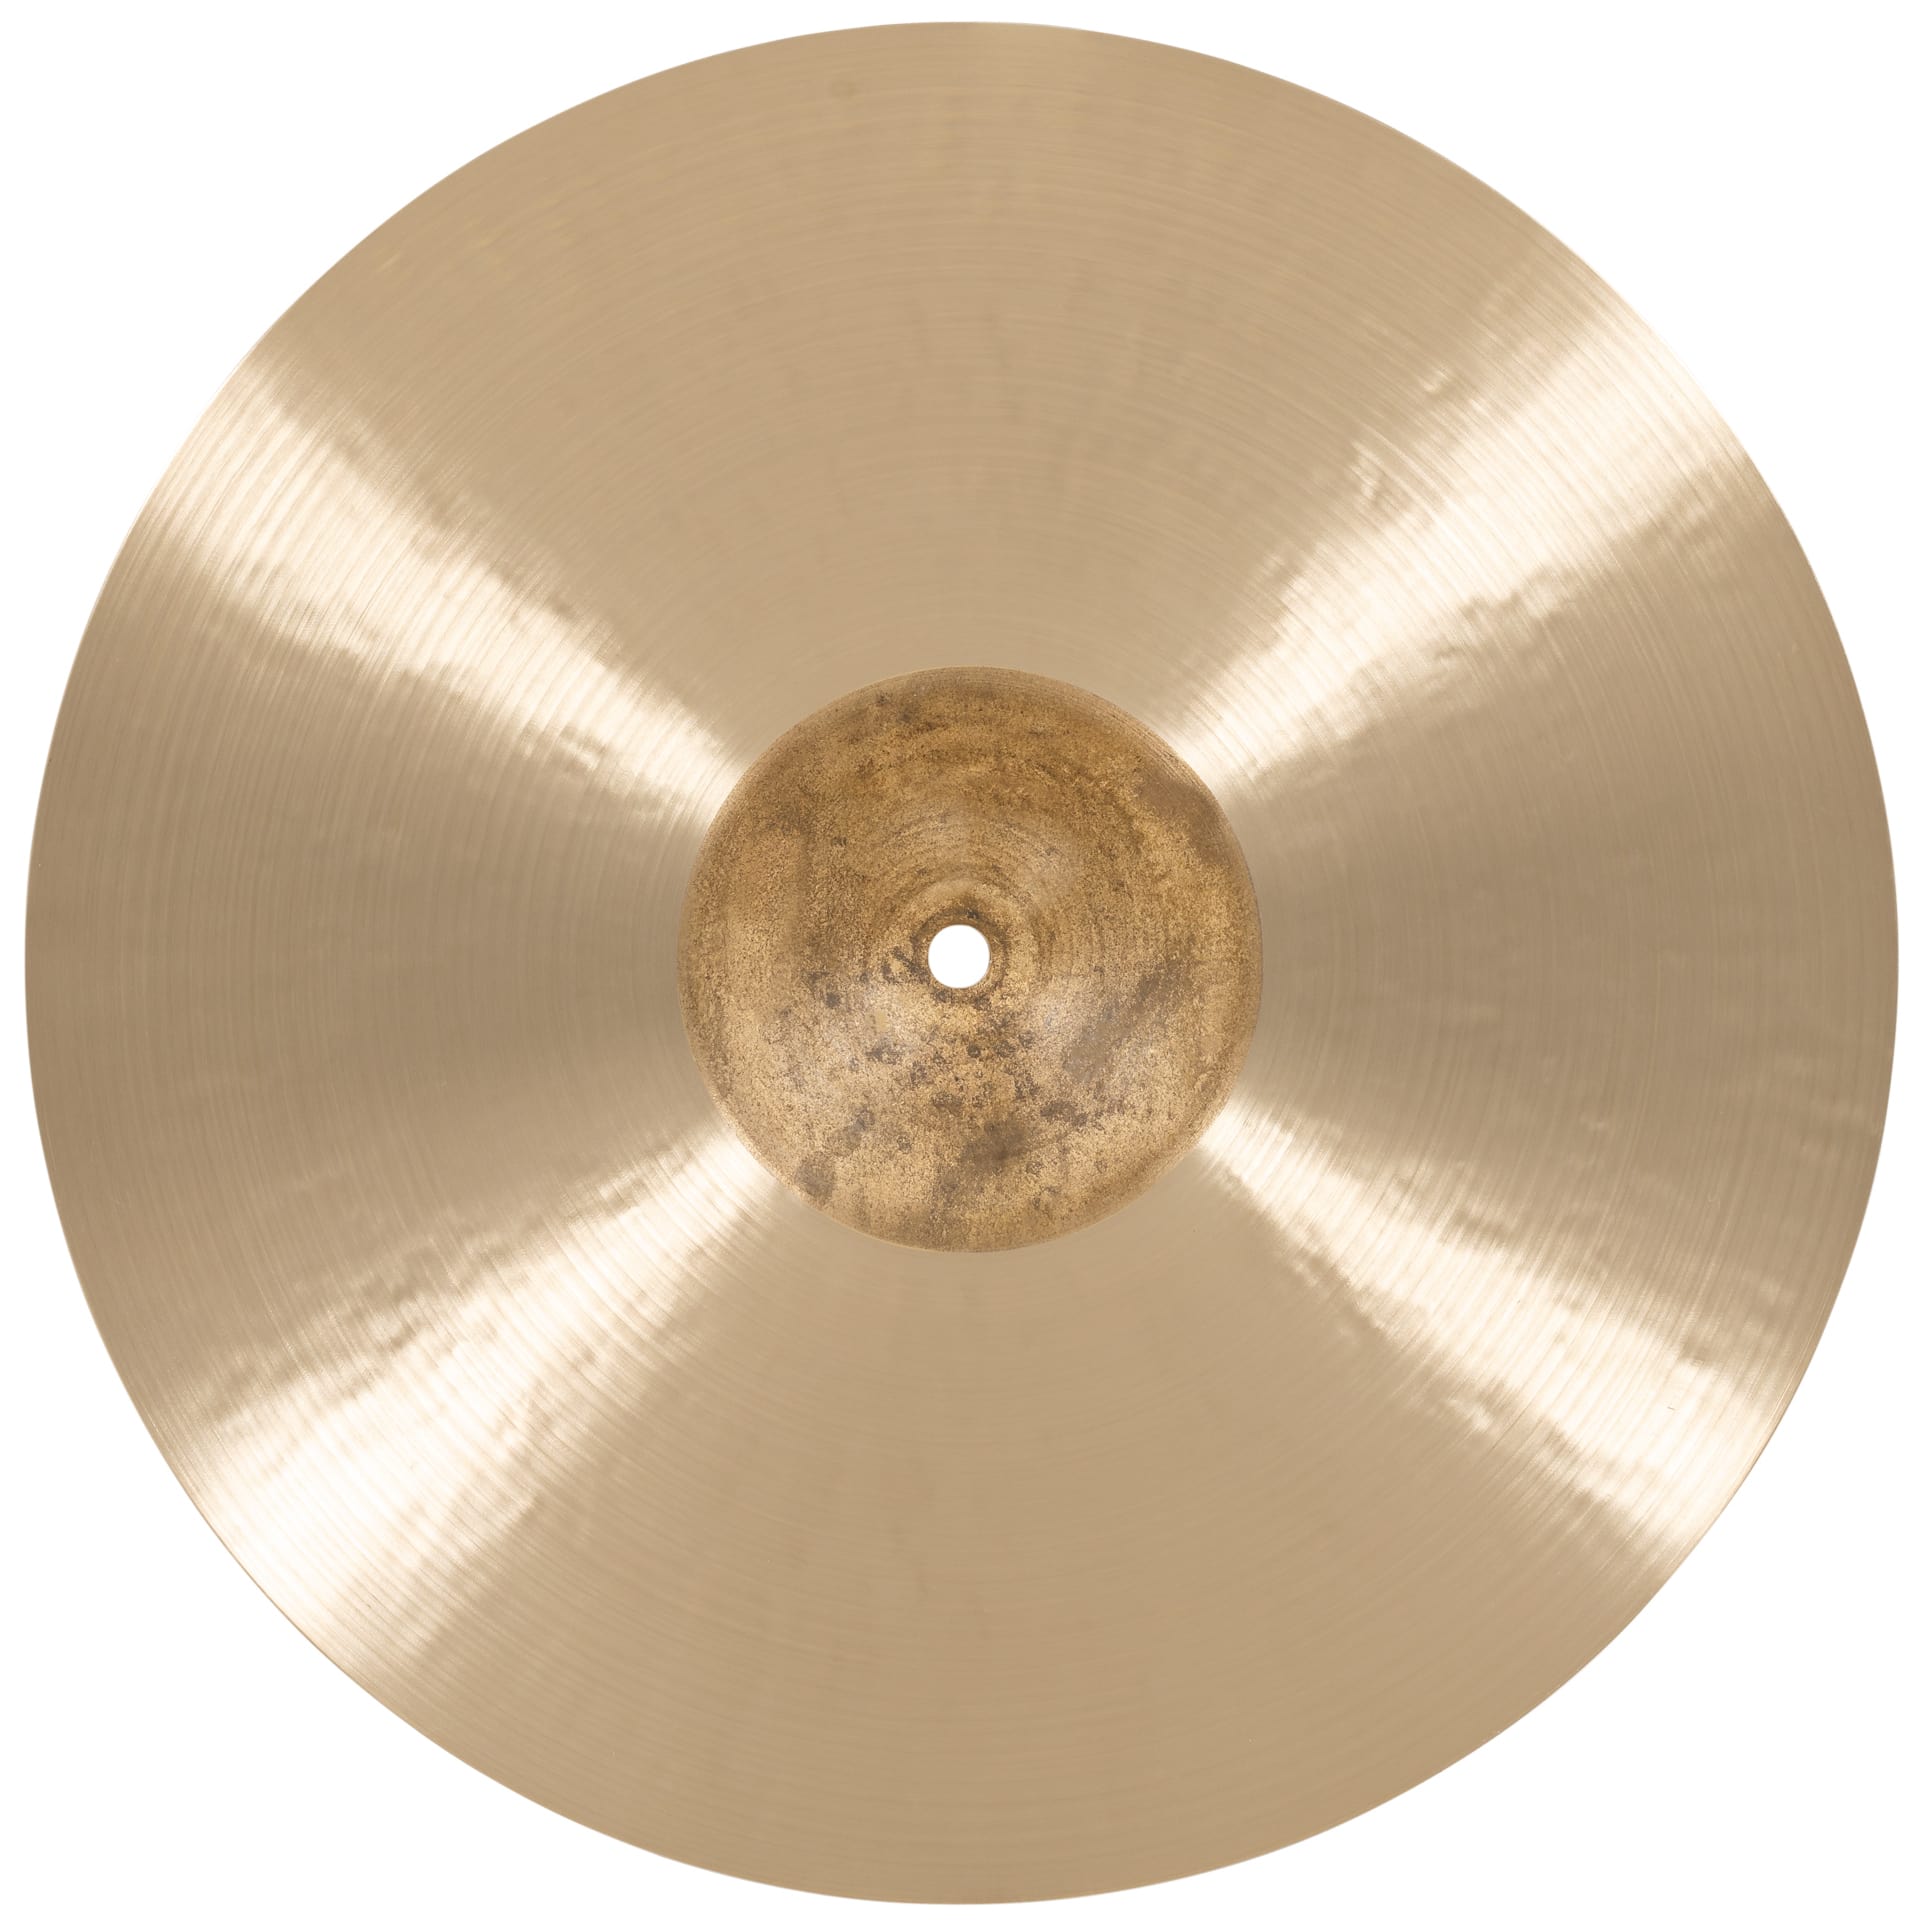 Meinl Cymbals B15POH - 15" Byzance Traditional Polyphonic Hihat 7